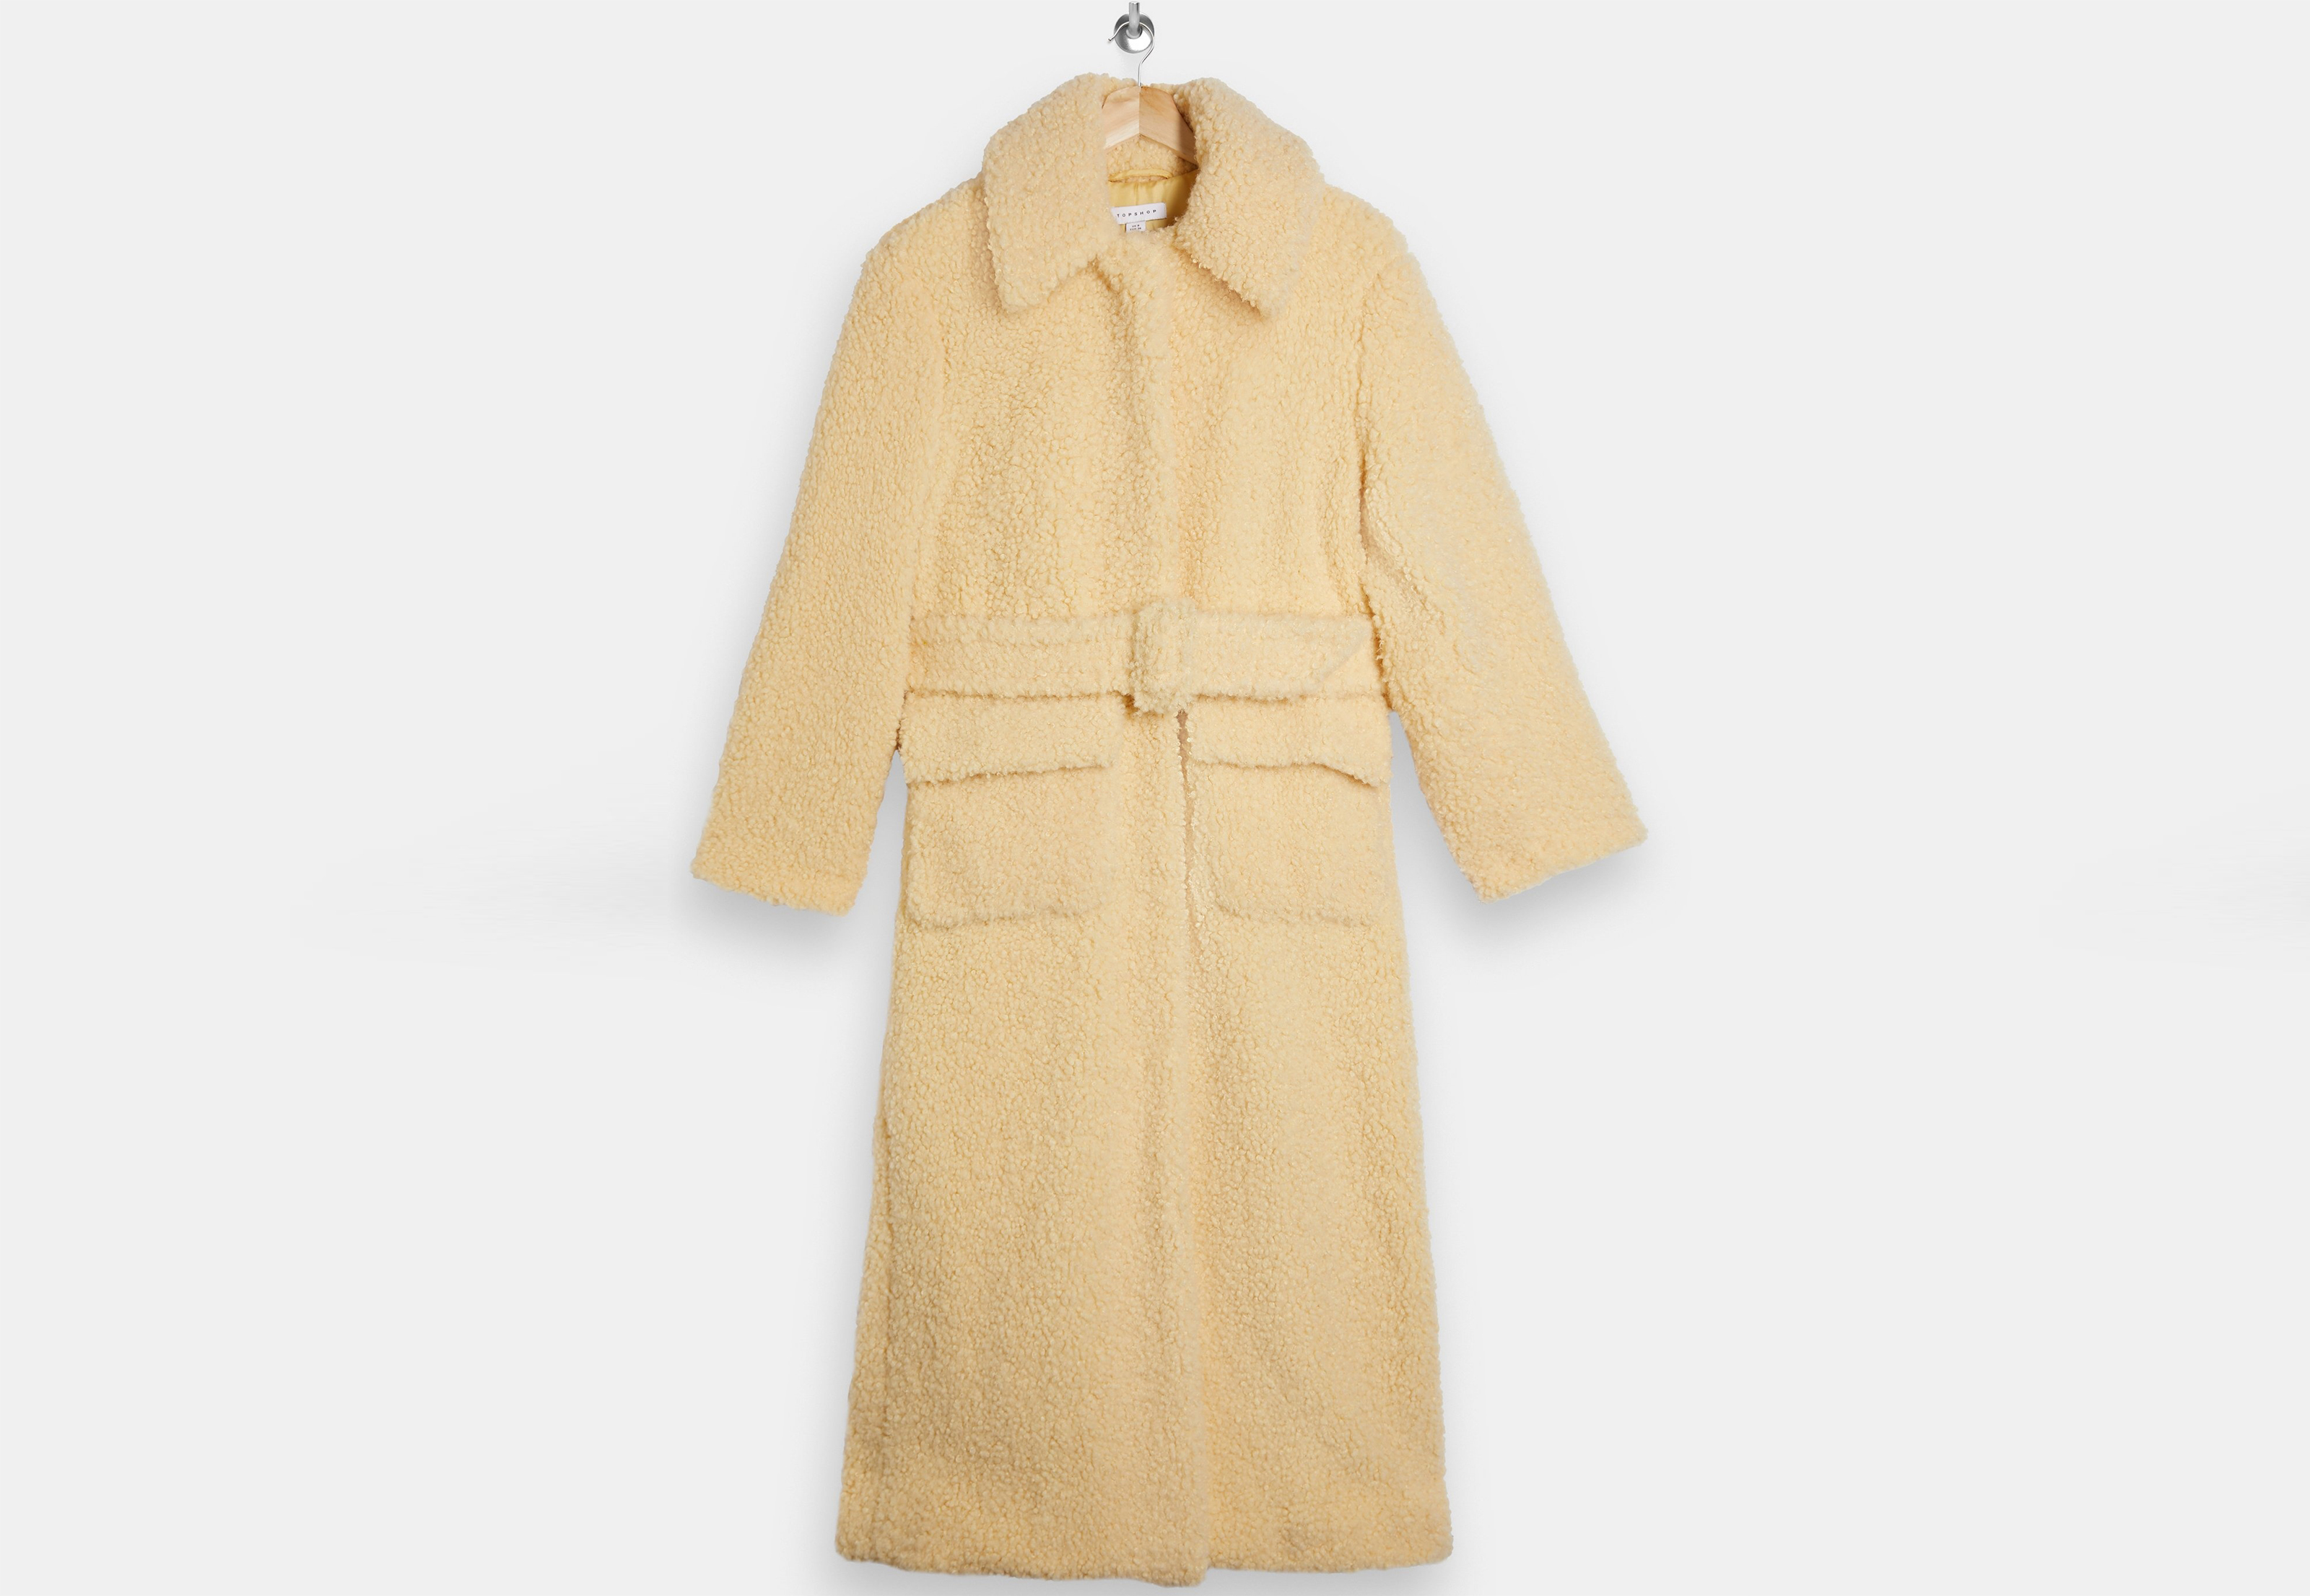 Topshop Buttermilk Borg Maxi Belted Coat, £63.99 (was £79.99)